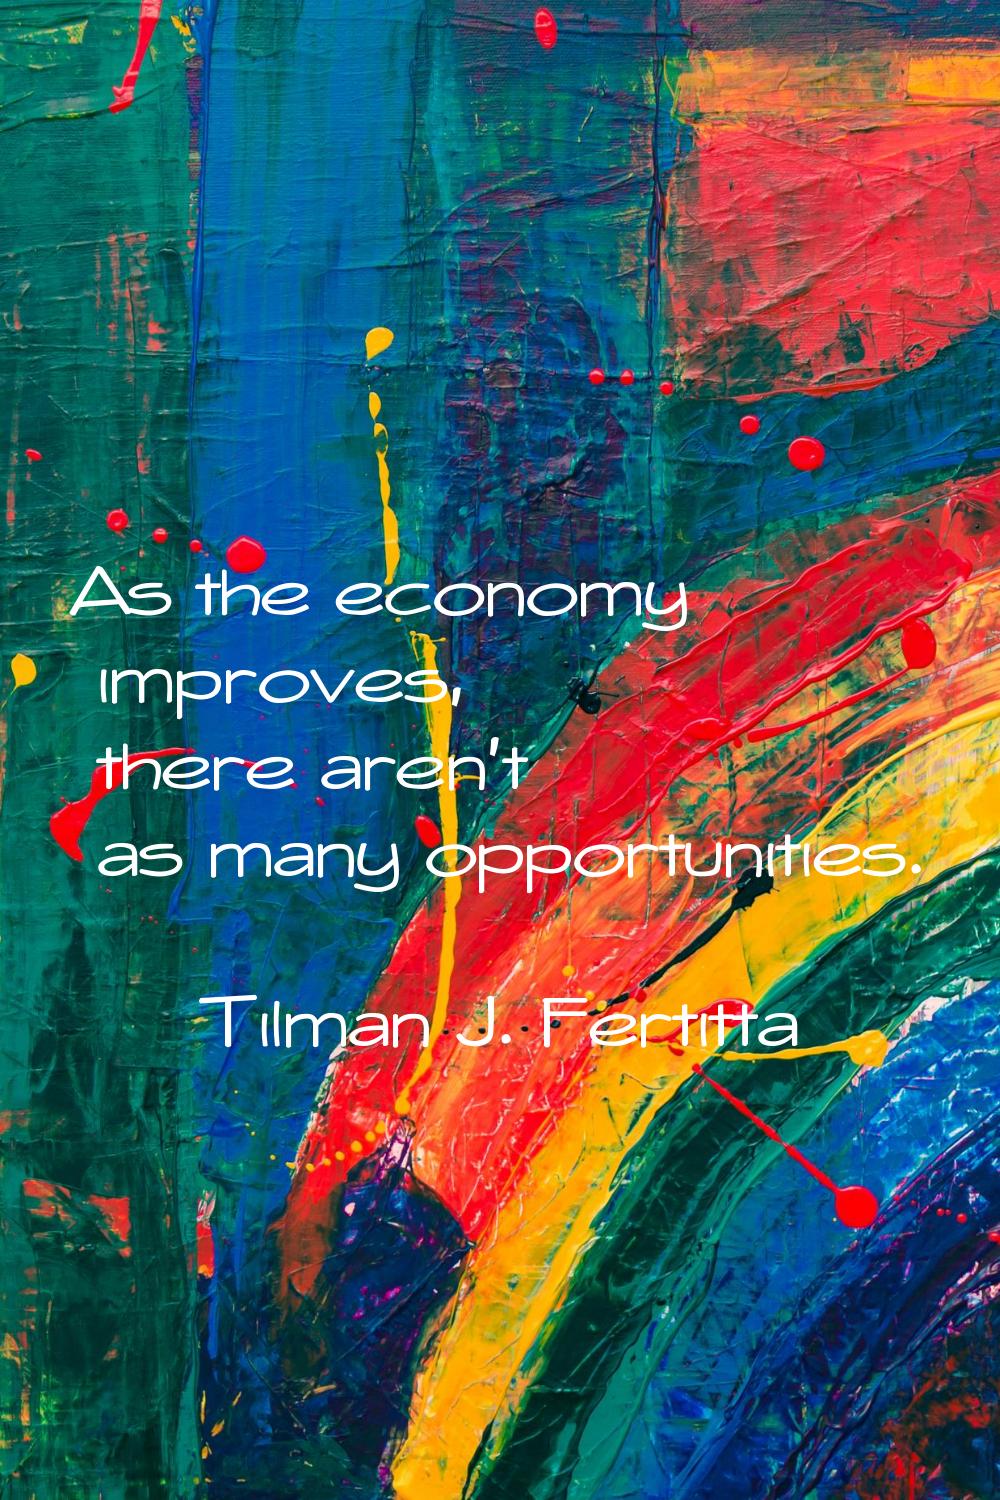 As the economy improves, there aren't as many opportunities.